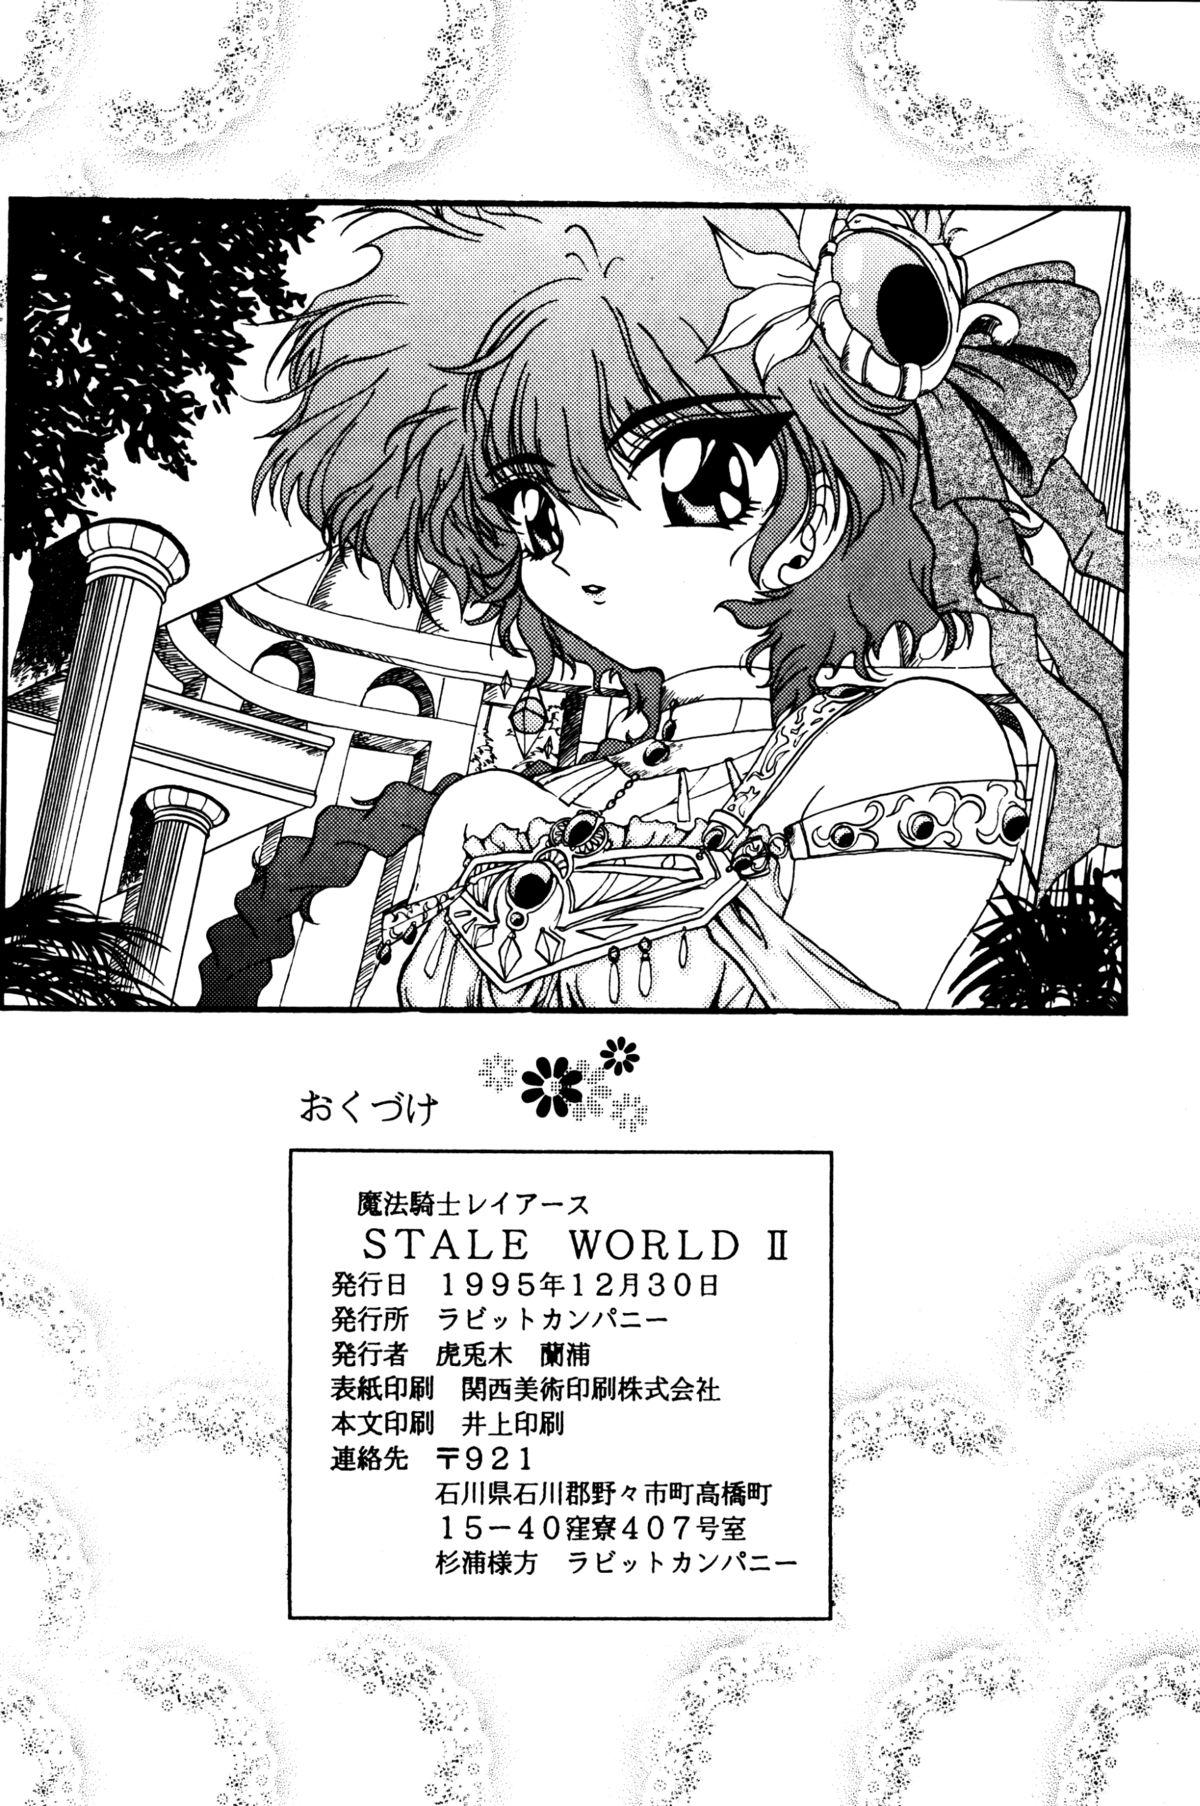 Ass Sex Stale World II - Magic knight rayearth Gay Public - Page 29